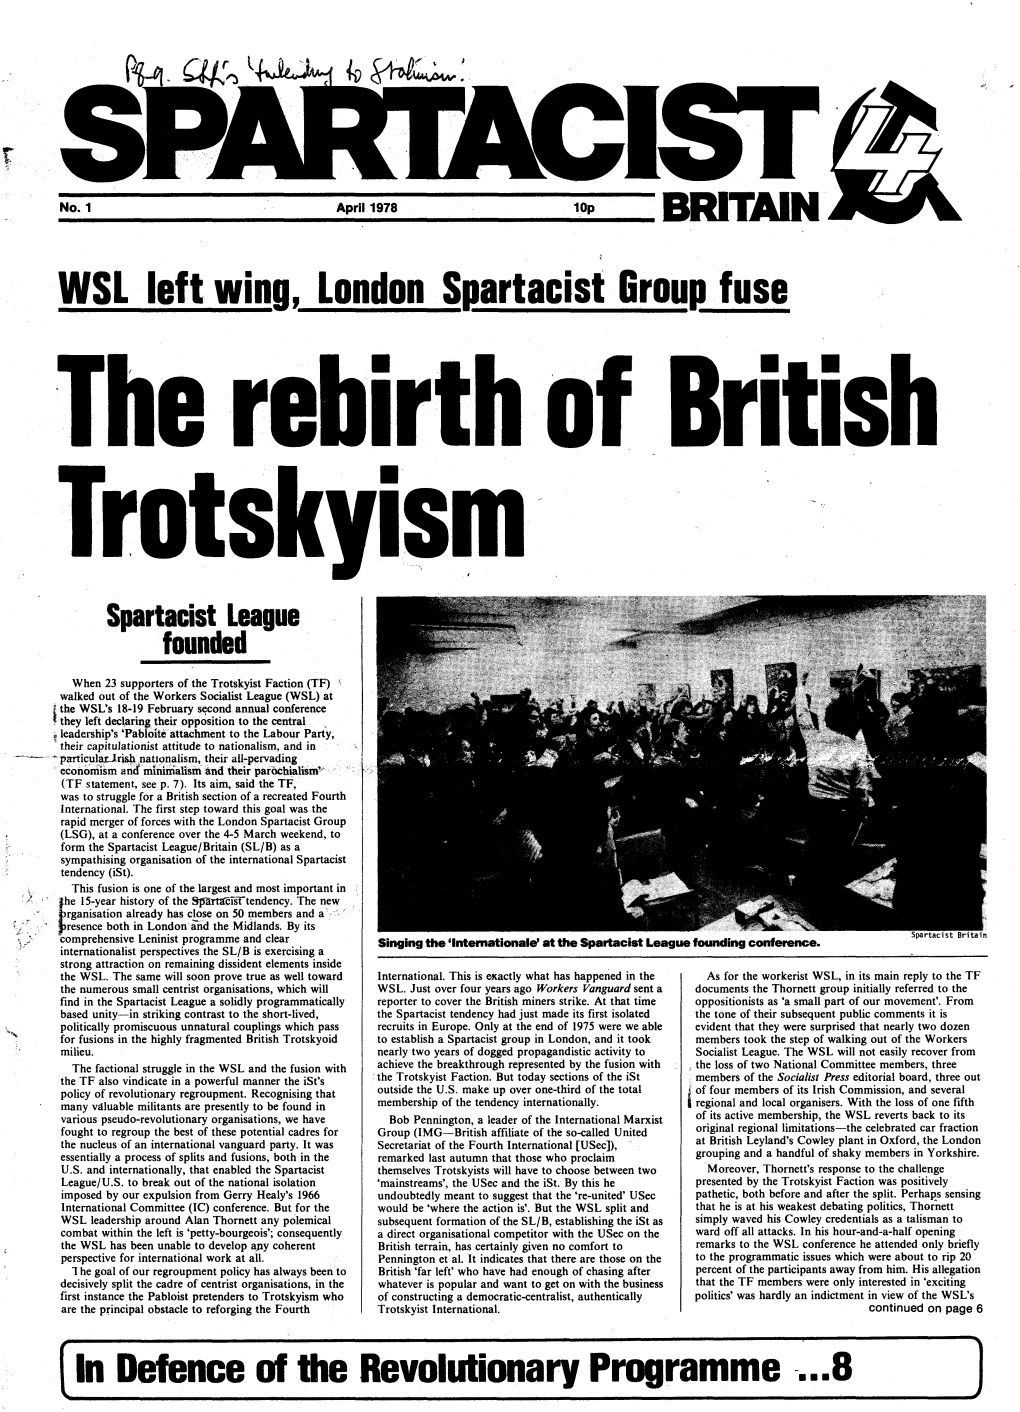 Spartacist League Founded